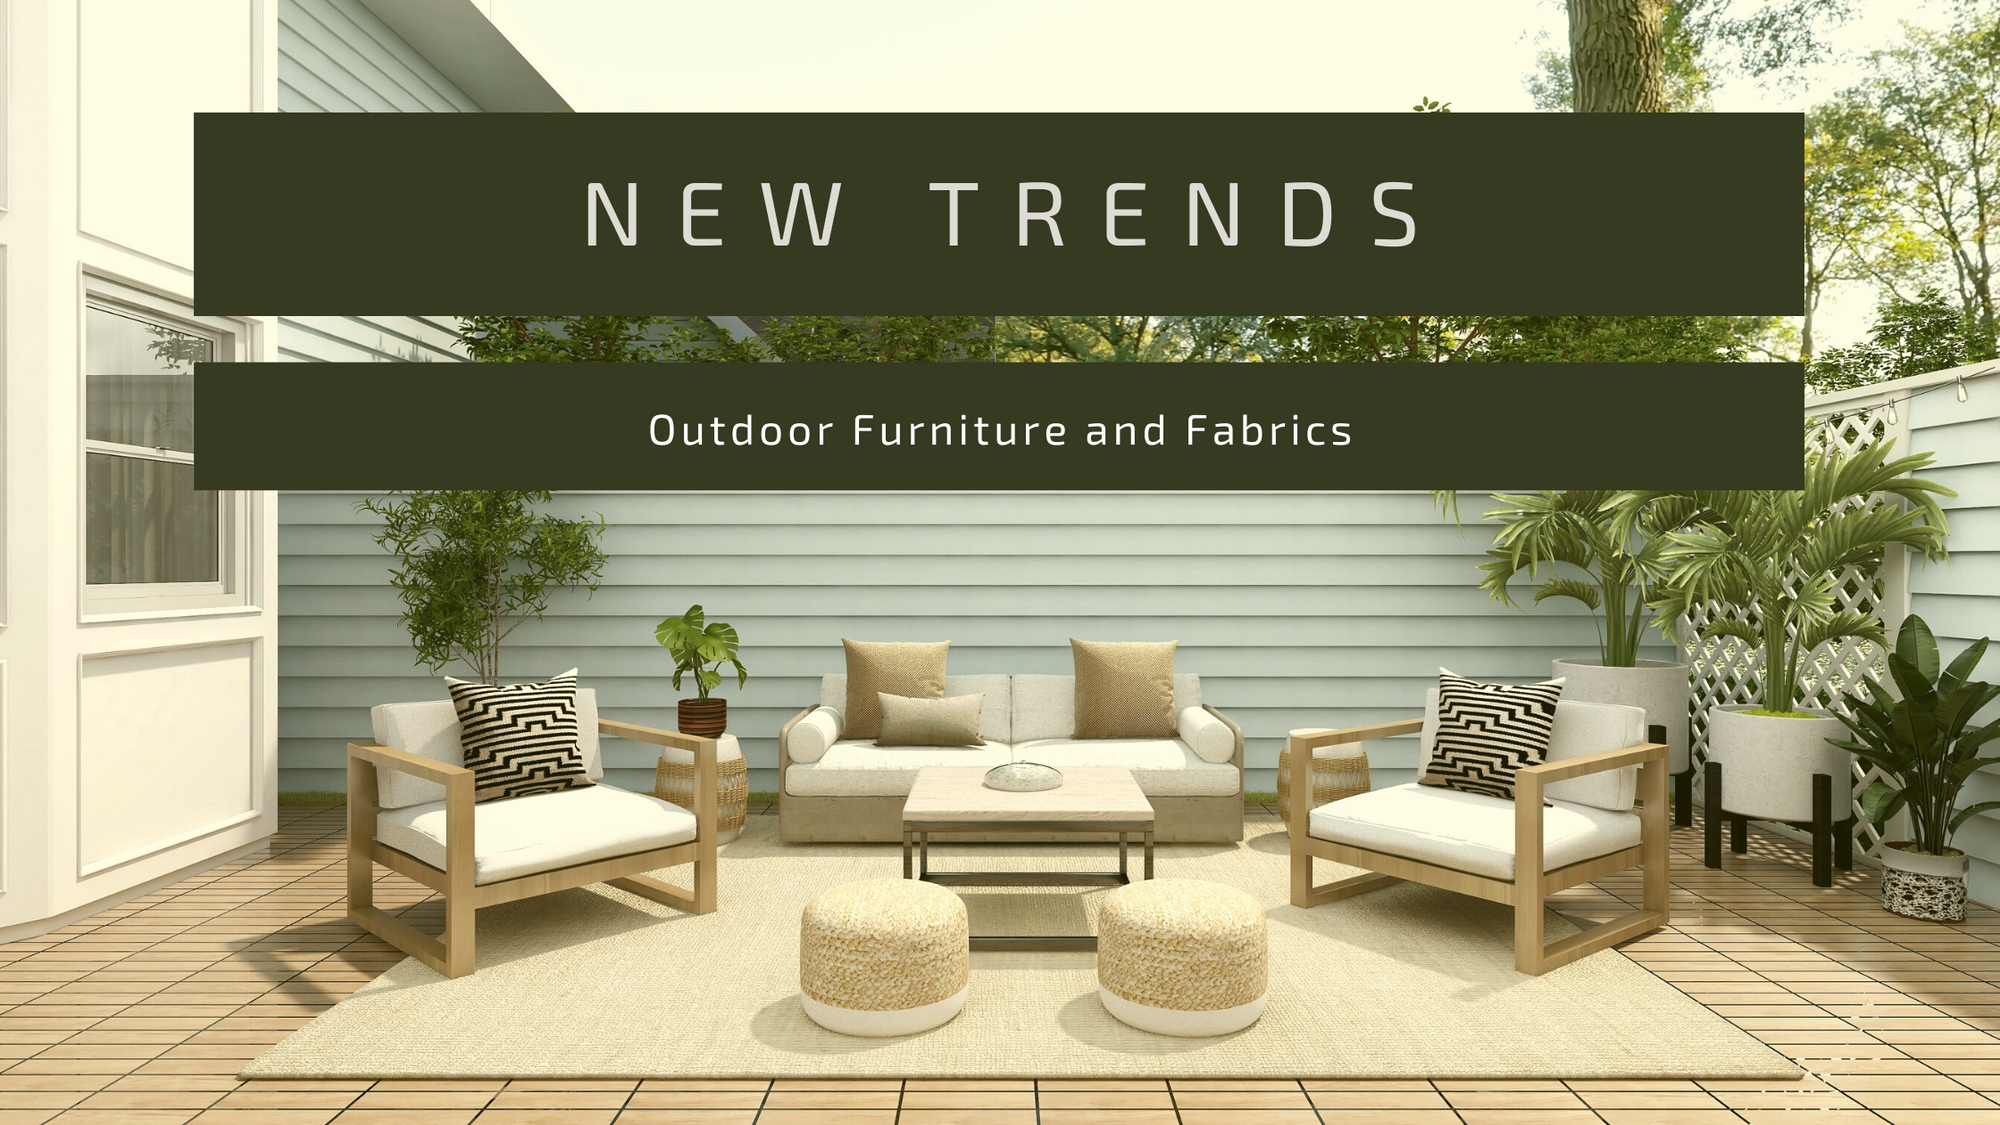 New Trends in Outdoor Furniture and Fabrics